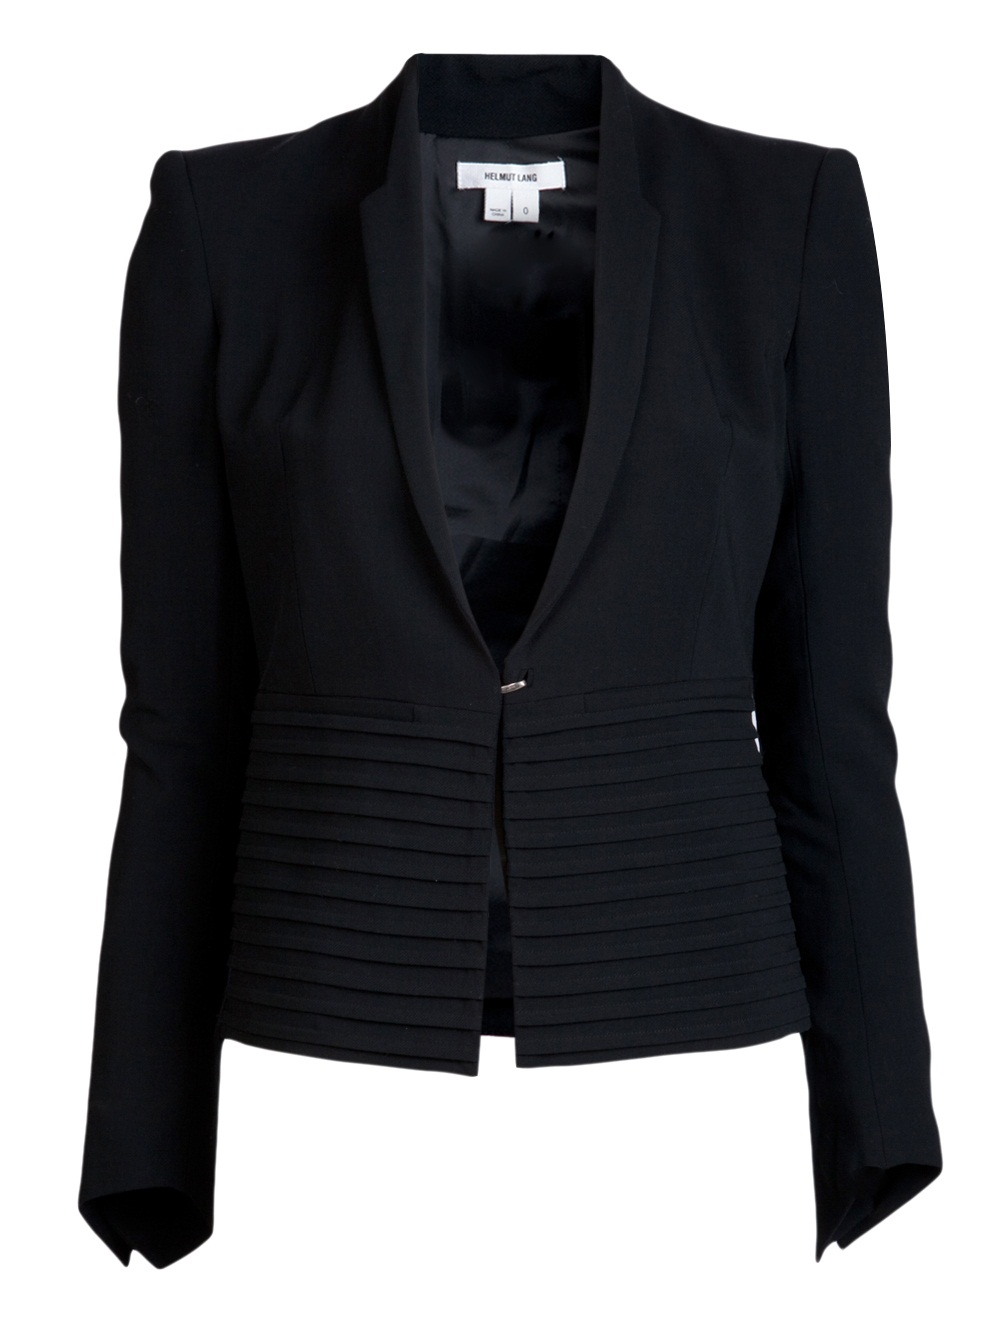 Helmut Lang Blazer with Tiers in Black - Lyst